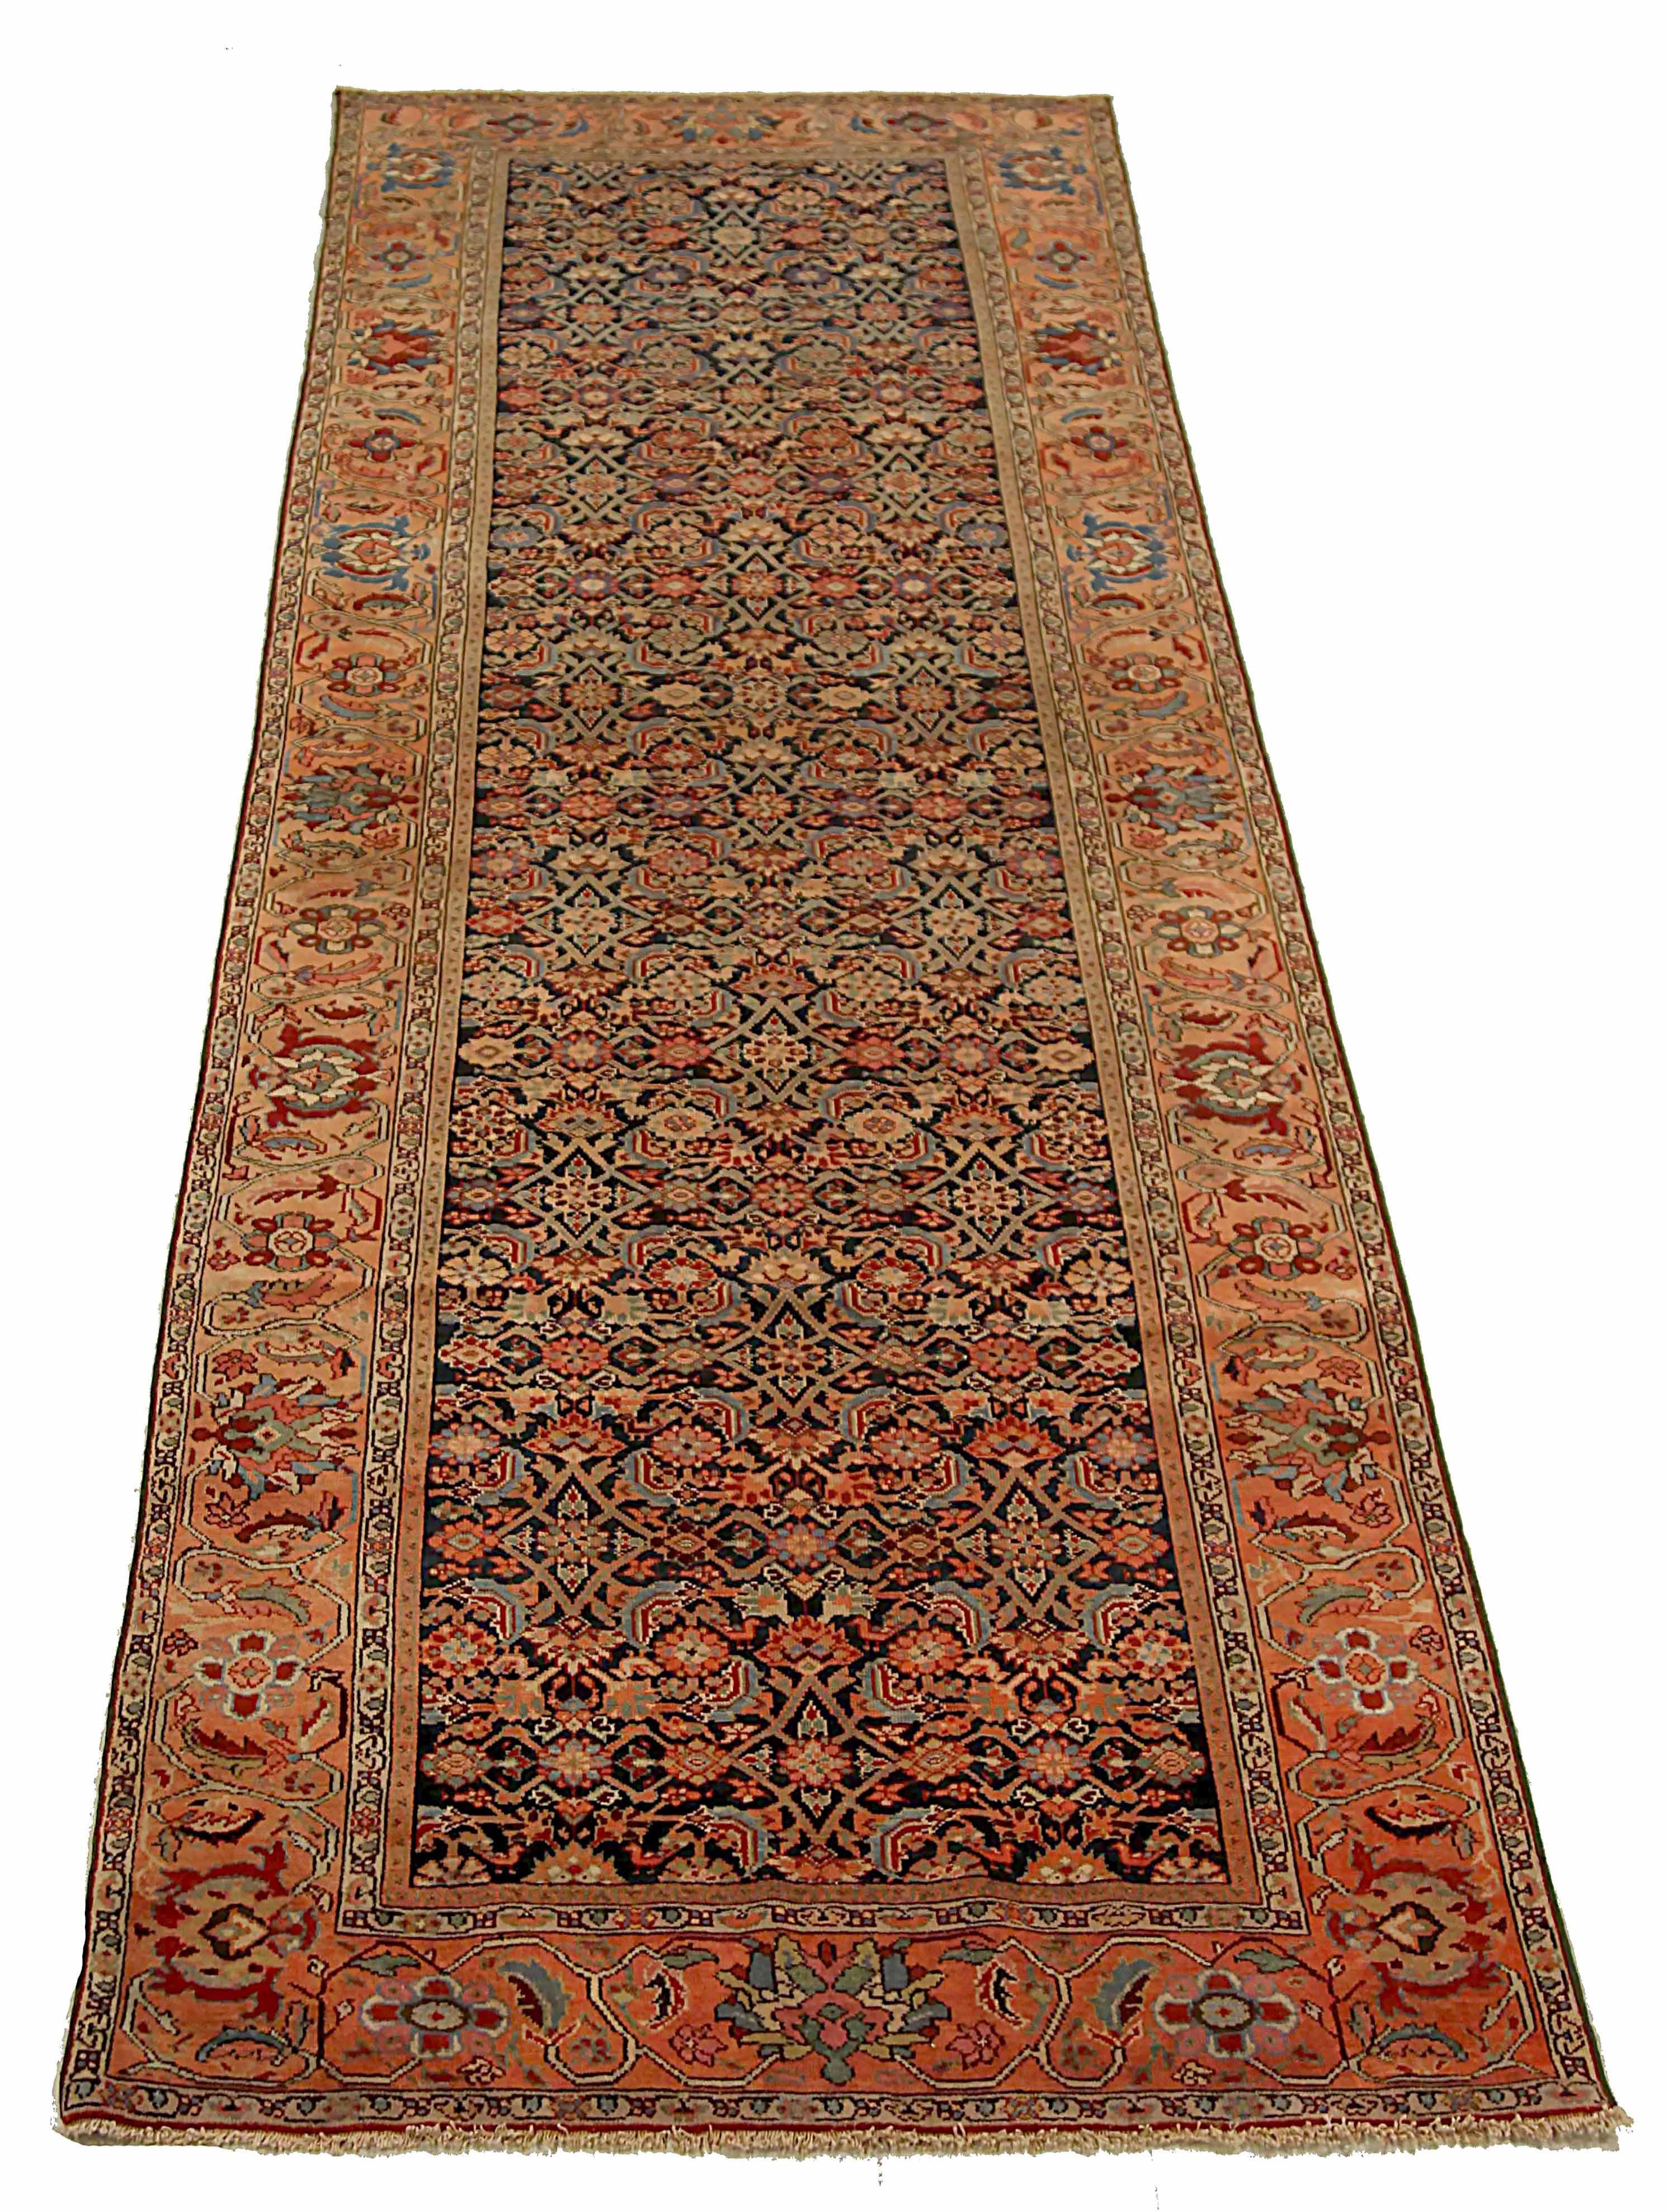 Antique Persian area rug handwoven from the finest sheep’s wool. It’s colored with all-natural vegetable dyes that are safe for humans and pets. It’s a traditional Malayer design handwoven by expert artisans. It’s a lovely area rug that can be